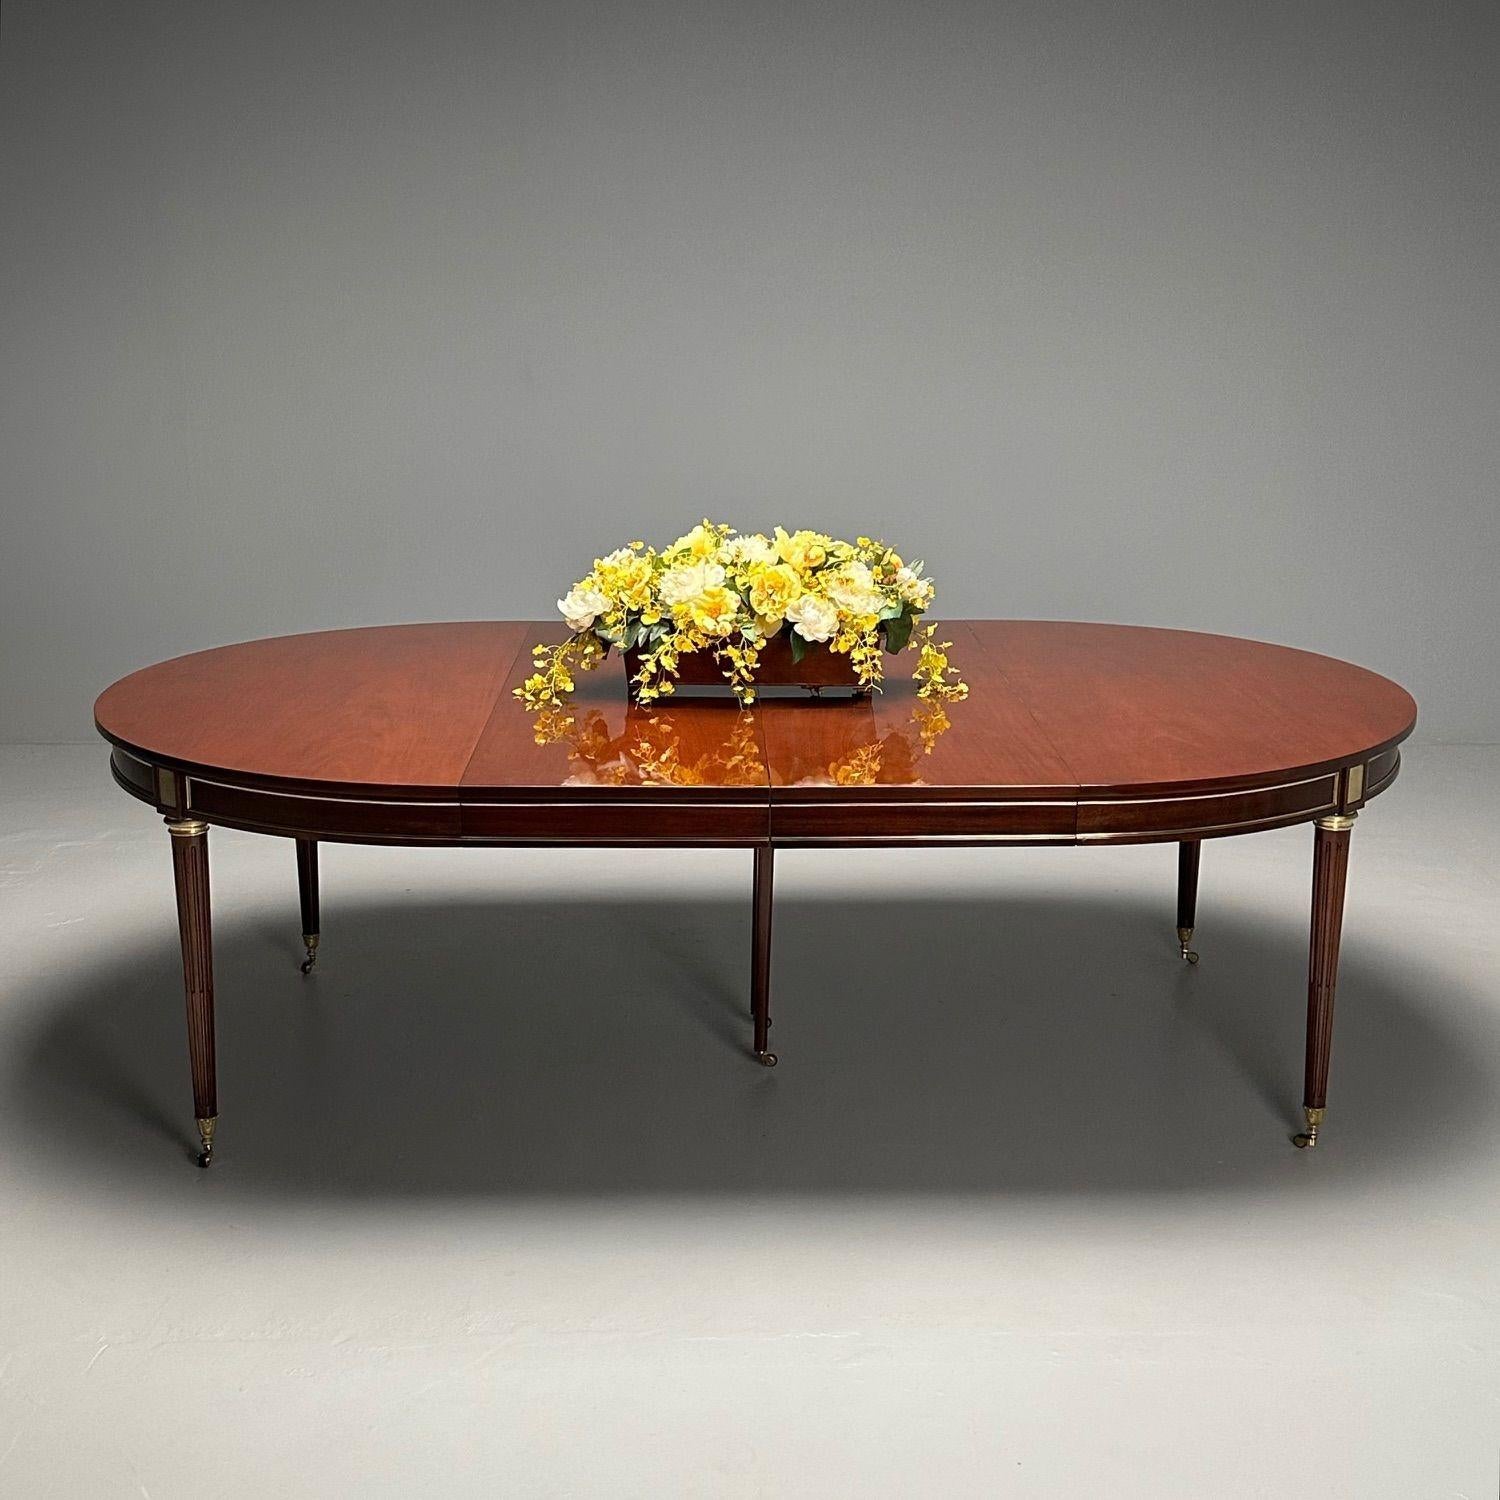 Maison Jansen Style, French Louis XVI, Dining Table, Circular, Mahogany, Bronze In Good Condition For Sale In Stamford, CT